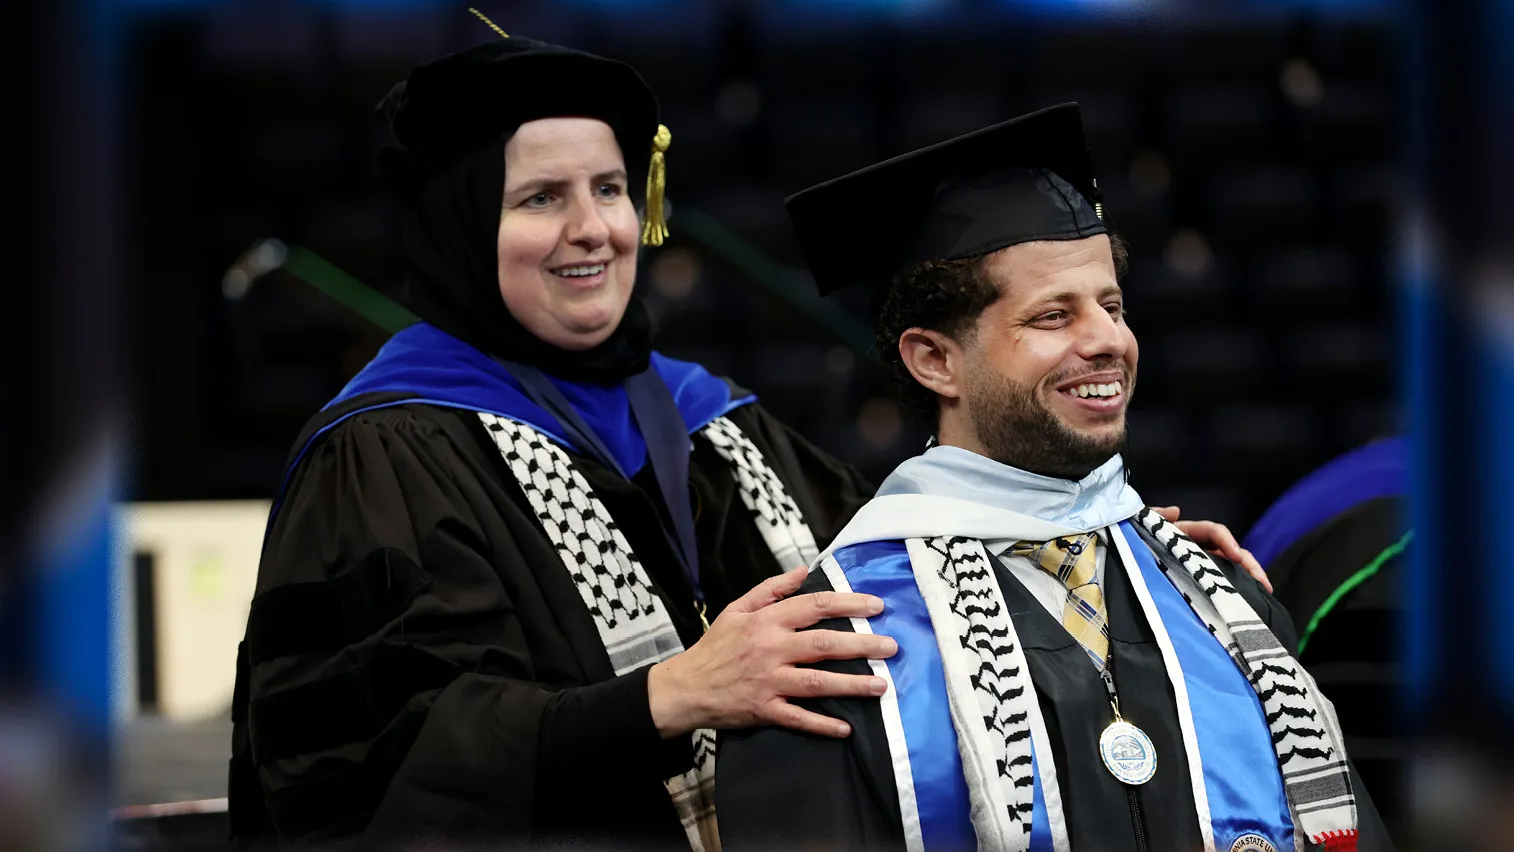 Naim Aburaddi (right) and Ahlam Muhtaseb, professor of media studies, at the CSUSB spring 2022 commencement ceremony on May 21.  